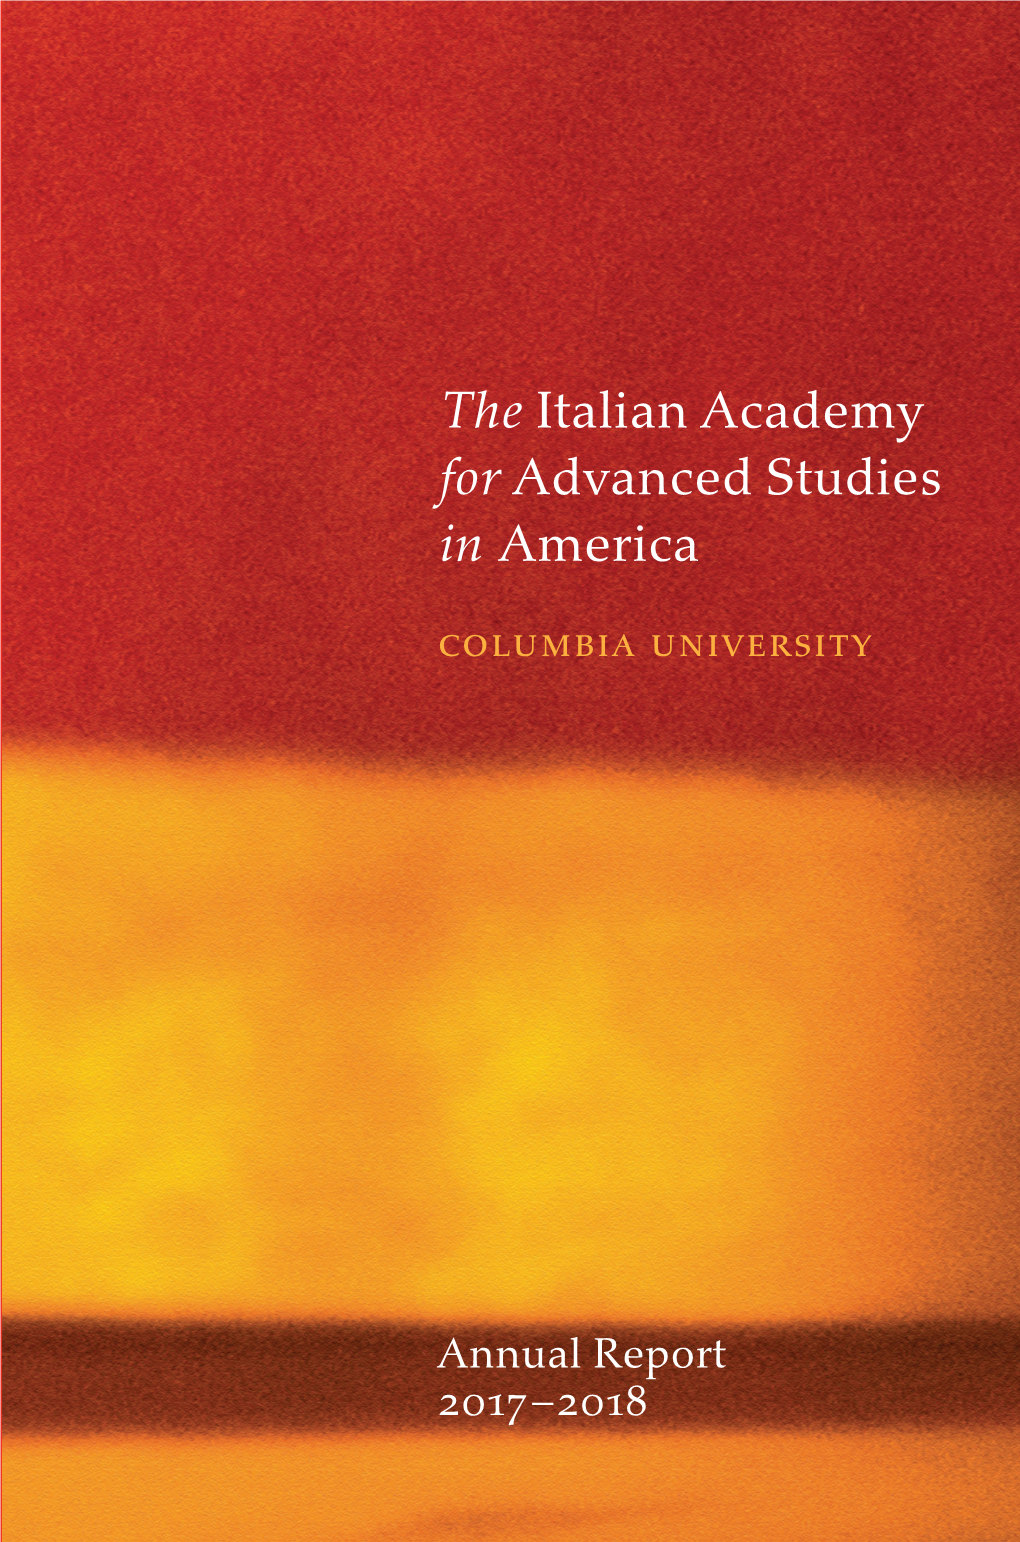 The Italian Academy for Advanced Studies in America